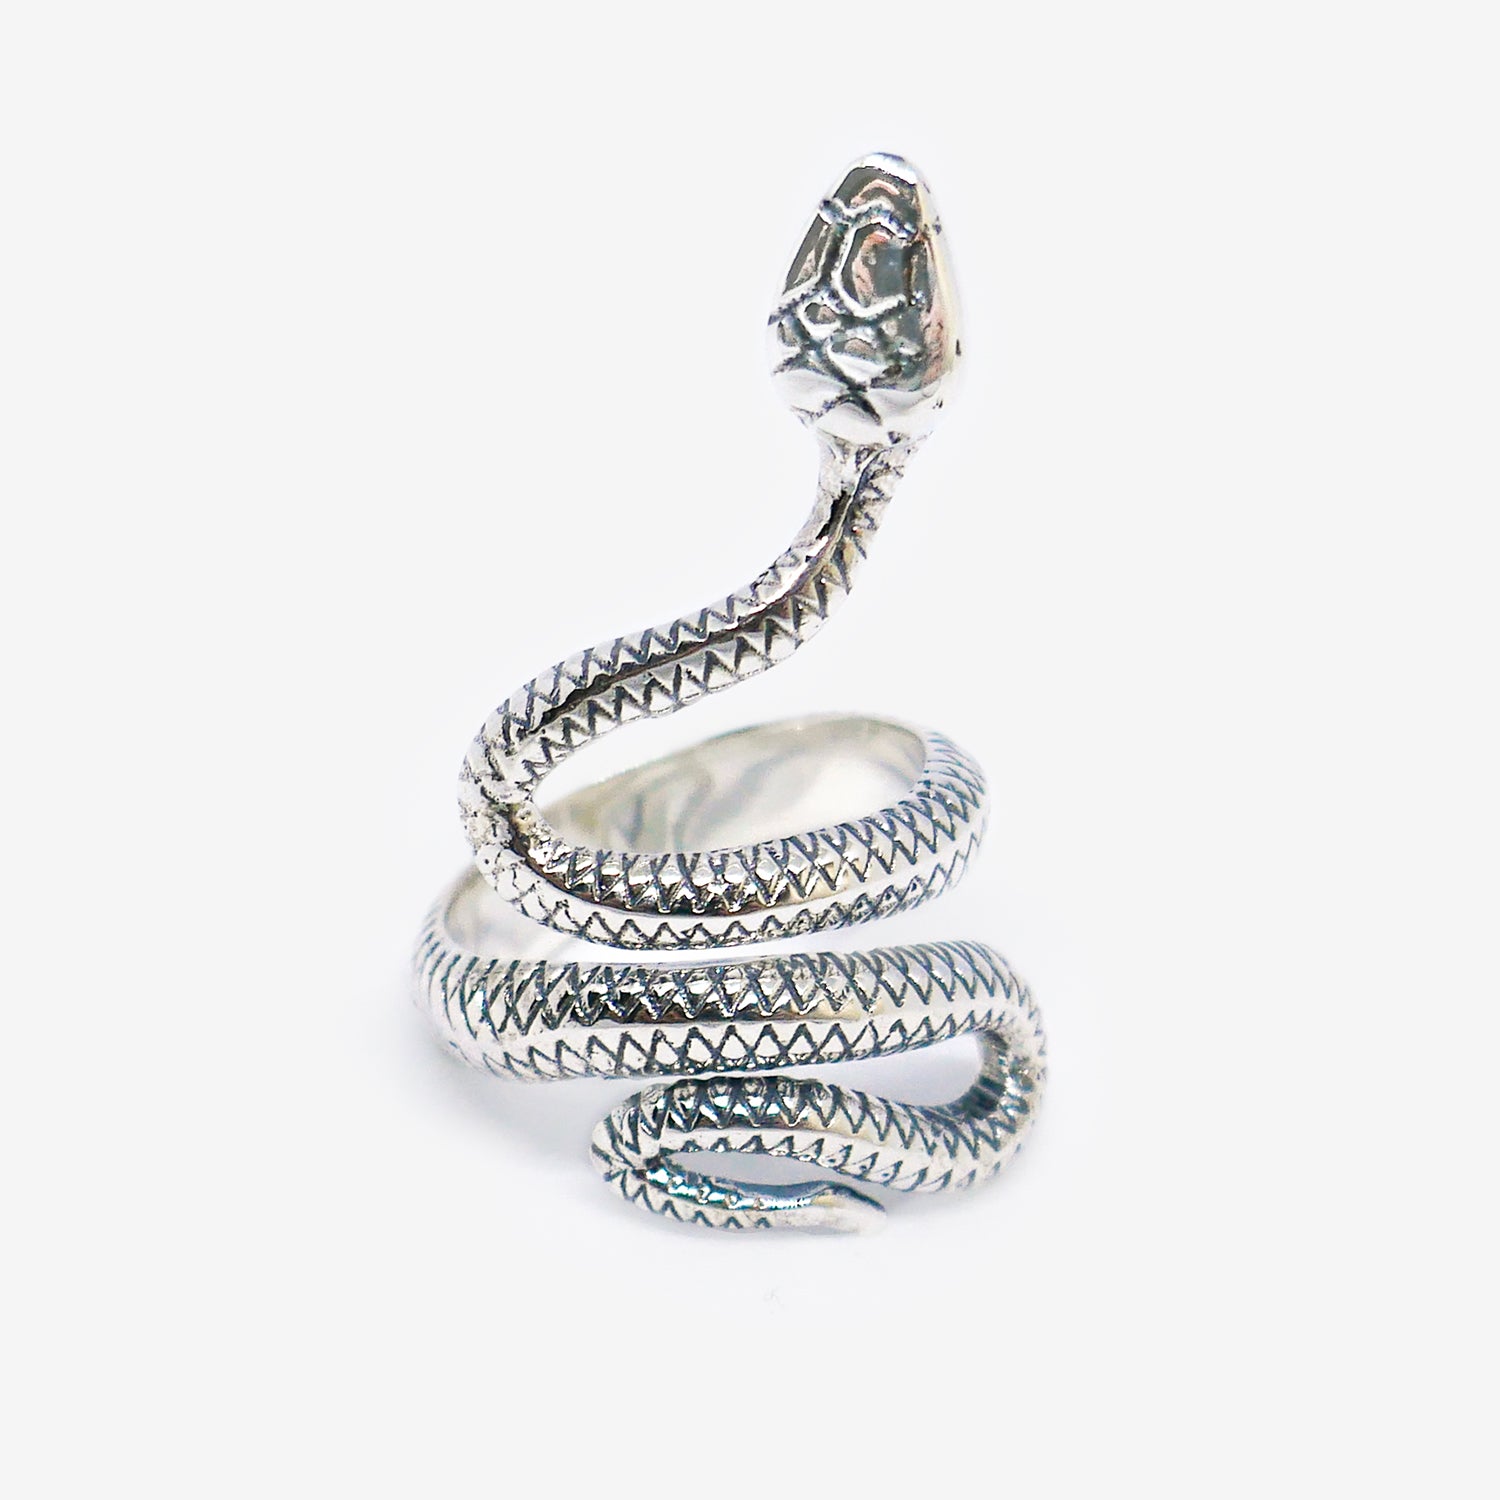 Punk 925 Sterling Silver Serpent Snake Ring Reptile Animal Jewelry for Men  Boys Two Tone Open and Adjustable|Amazon.com